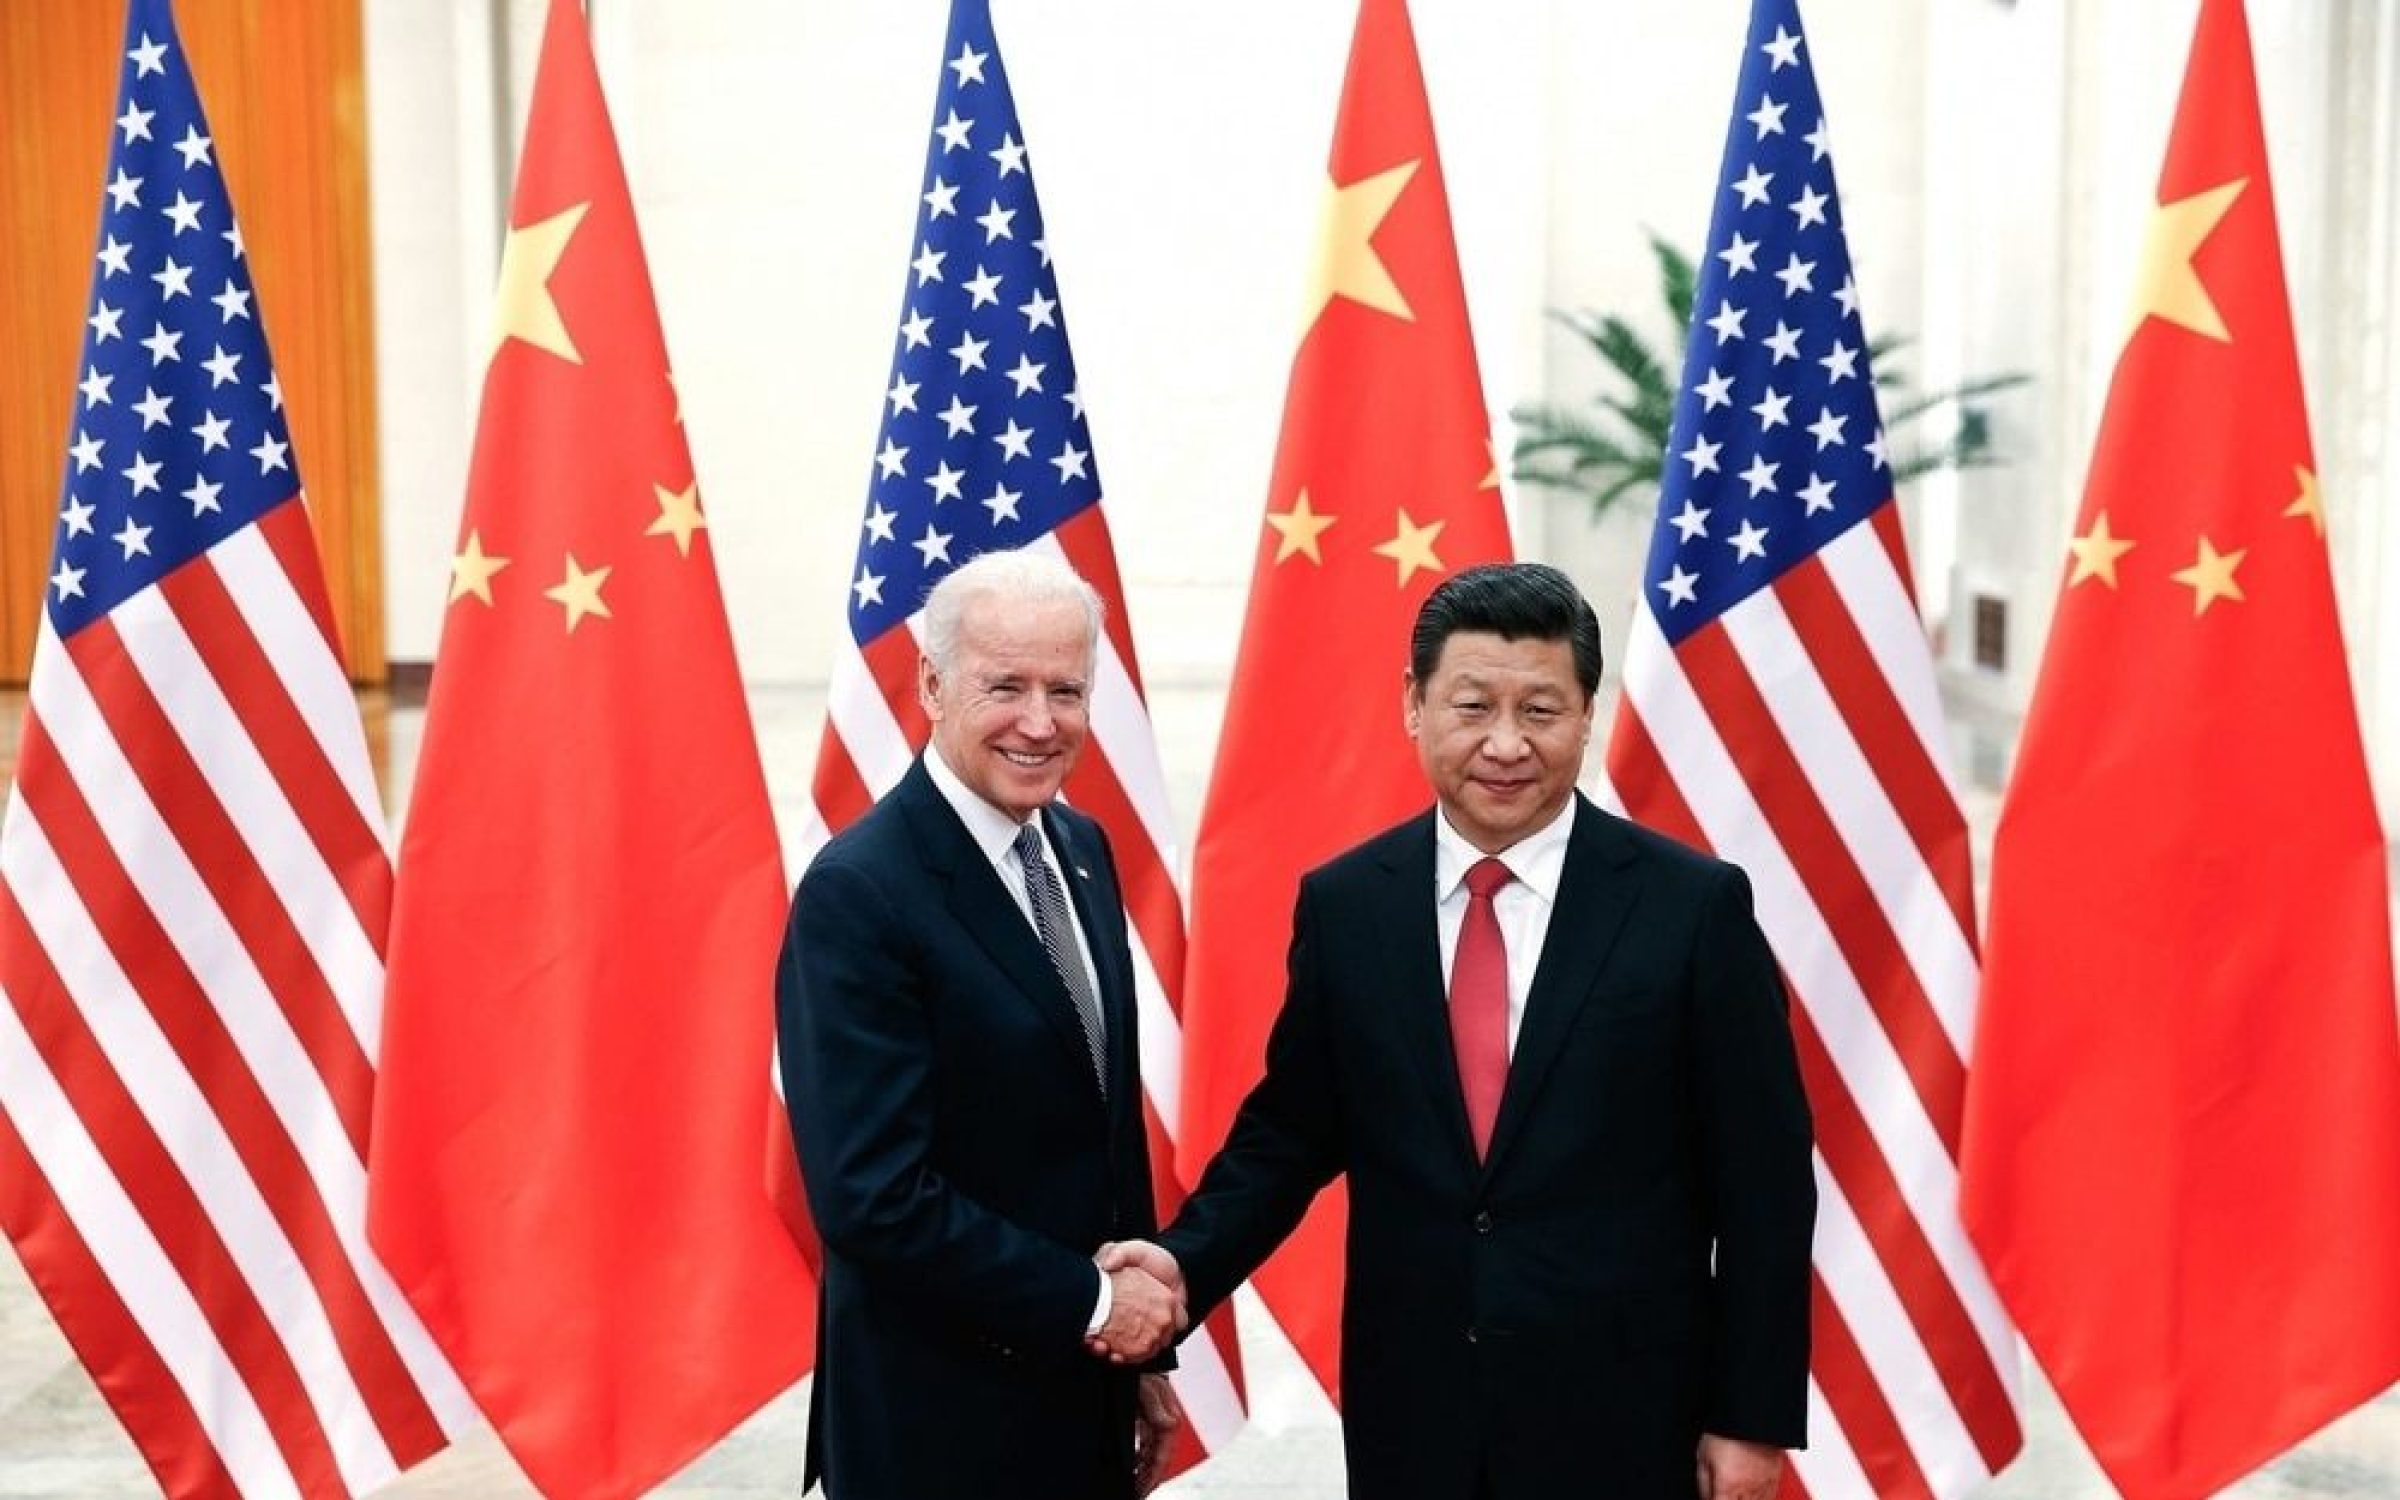 Chinese President Xi Jinping shake hands with then US Vice President Joe Biden inside the Great Hall of the People on December 4, 2013 in Beijing, China.